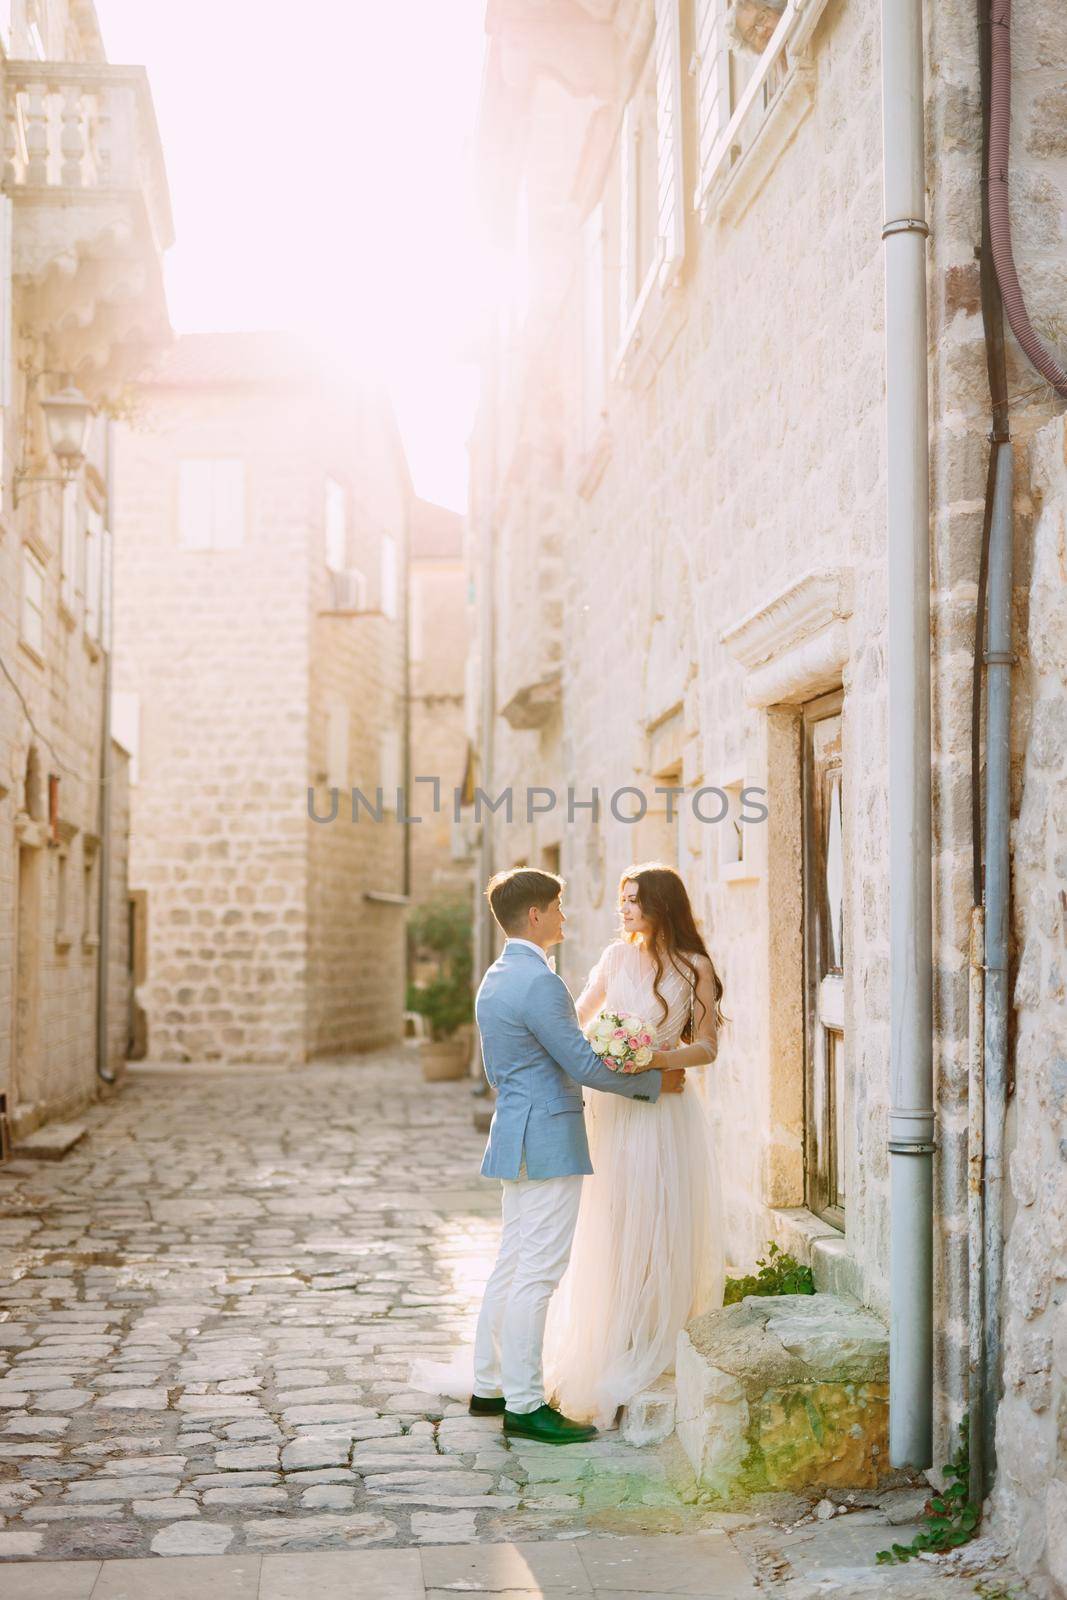 The bride and groom hug on a beautiful old street of Perast near a white stone wall by Nadtochiy